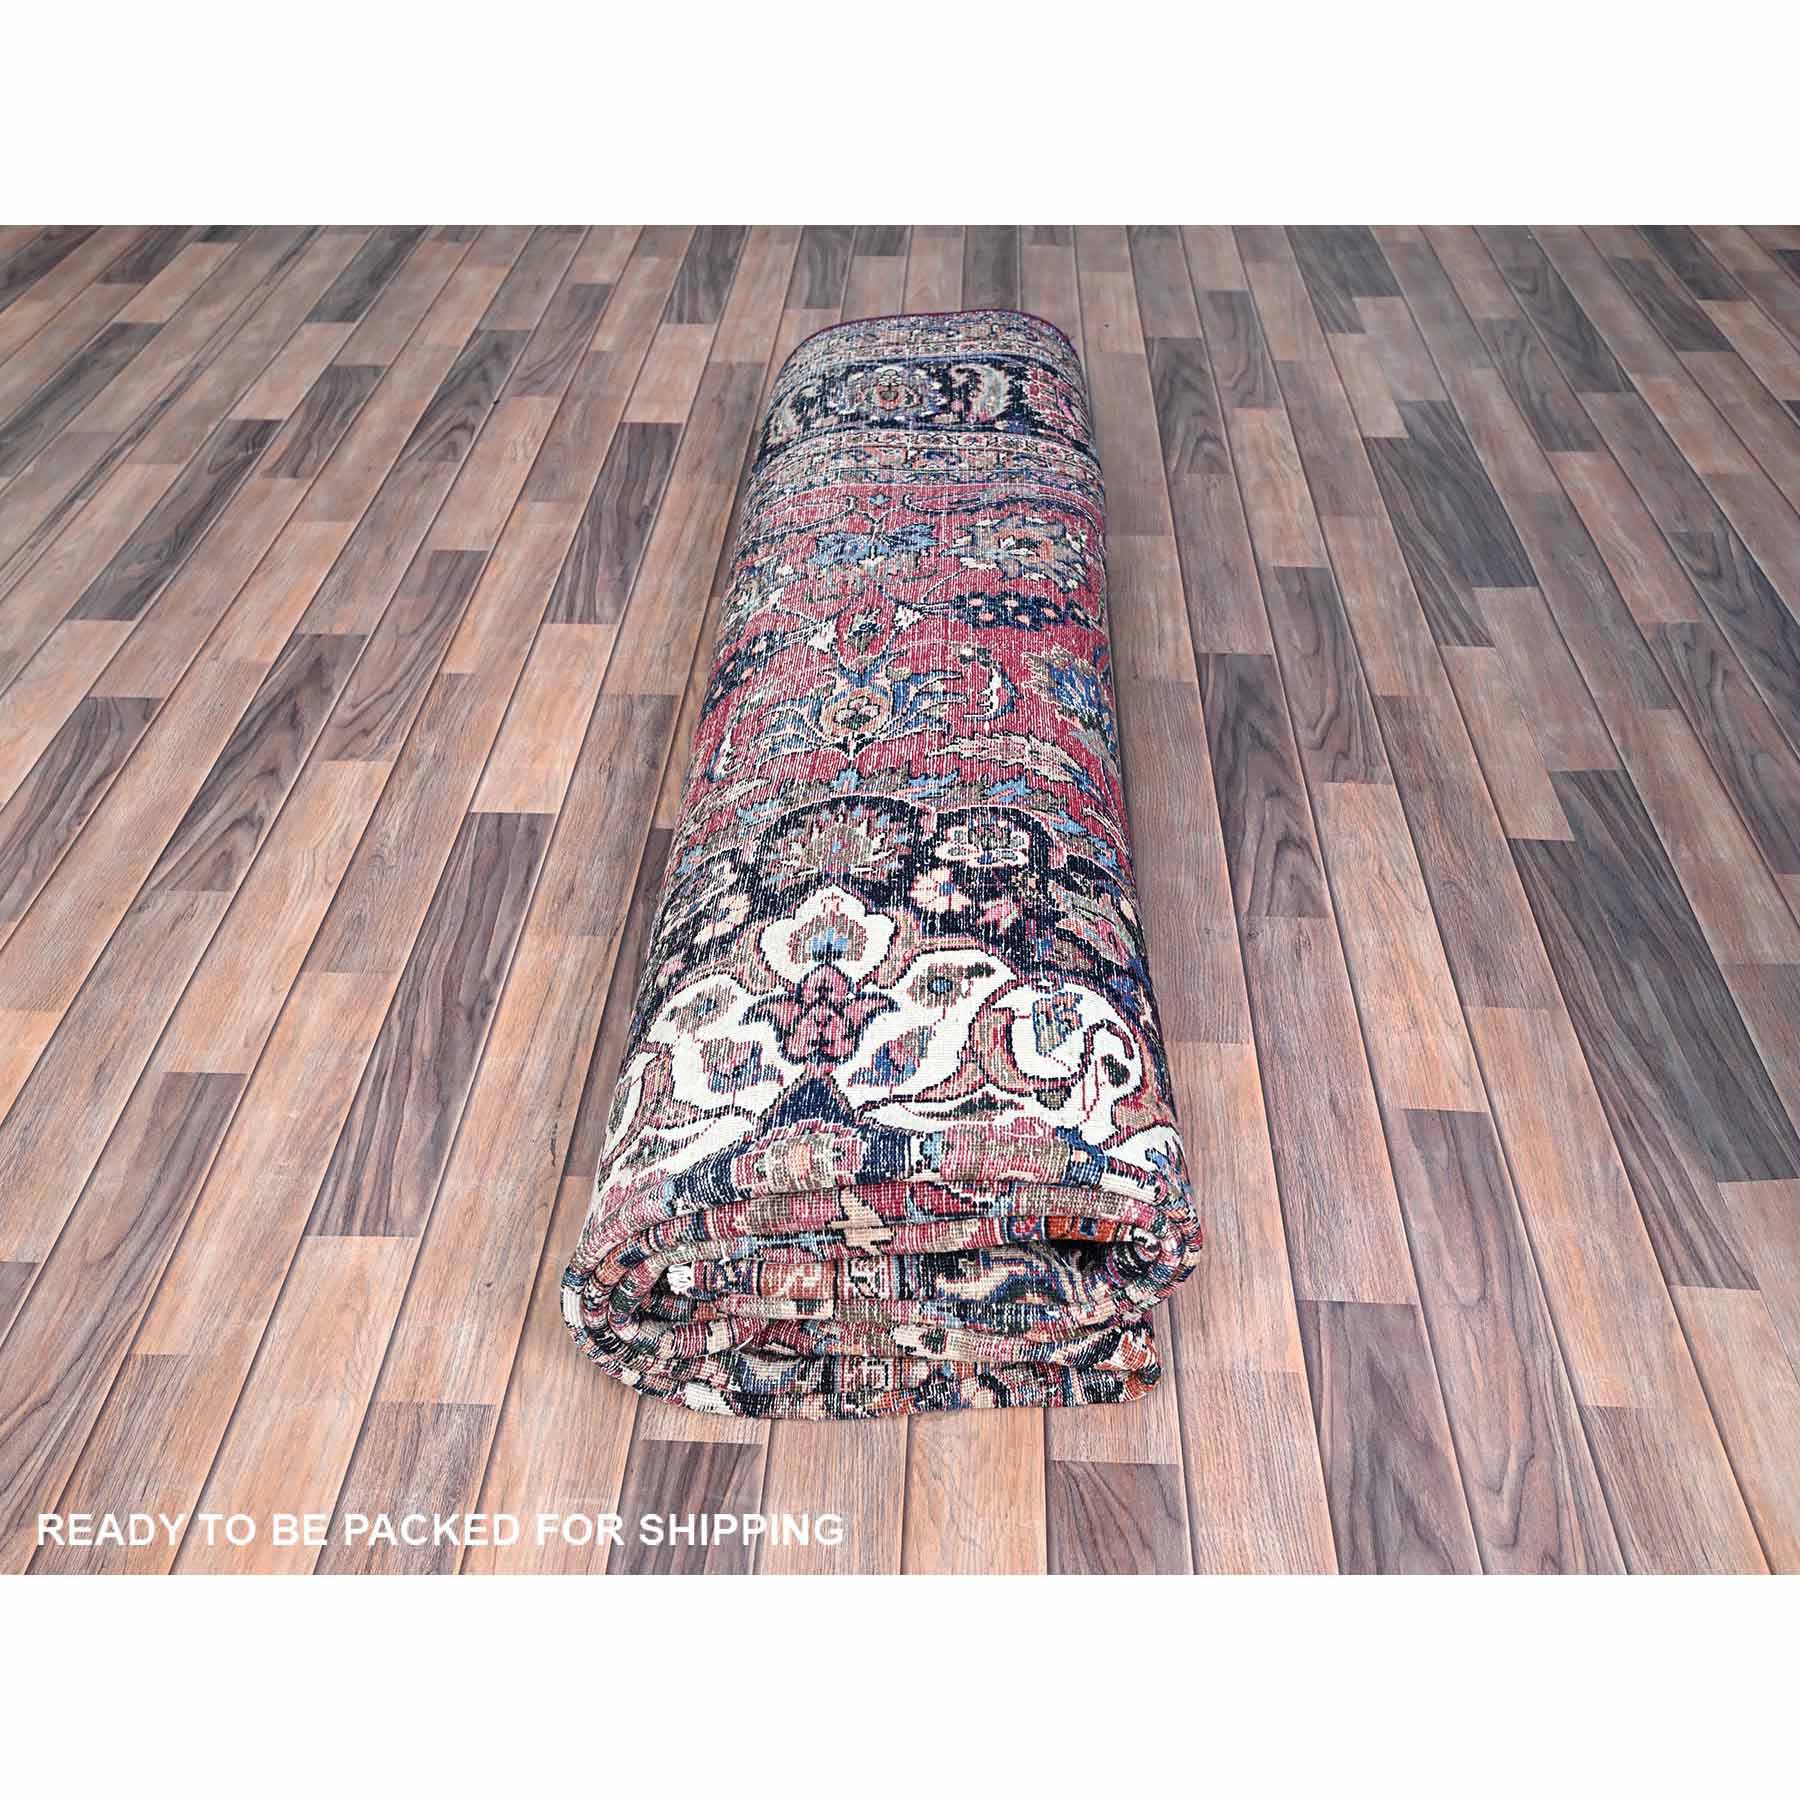 Overdyed-Vintage-Hand-Knotted-Rug-430975